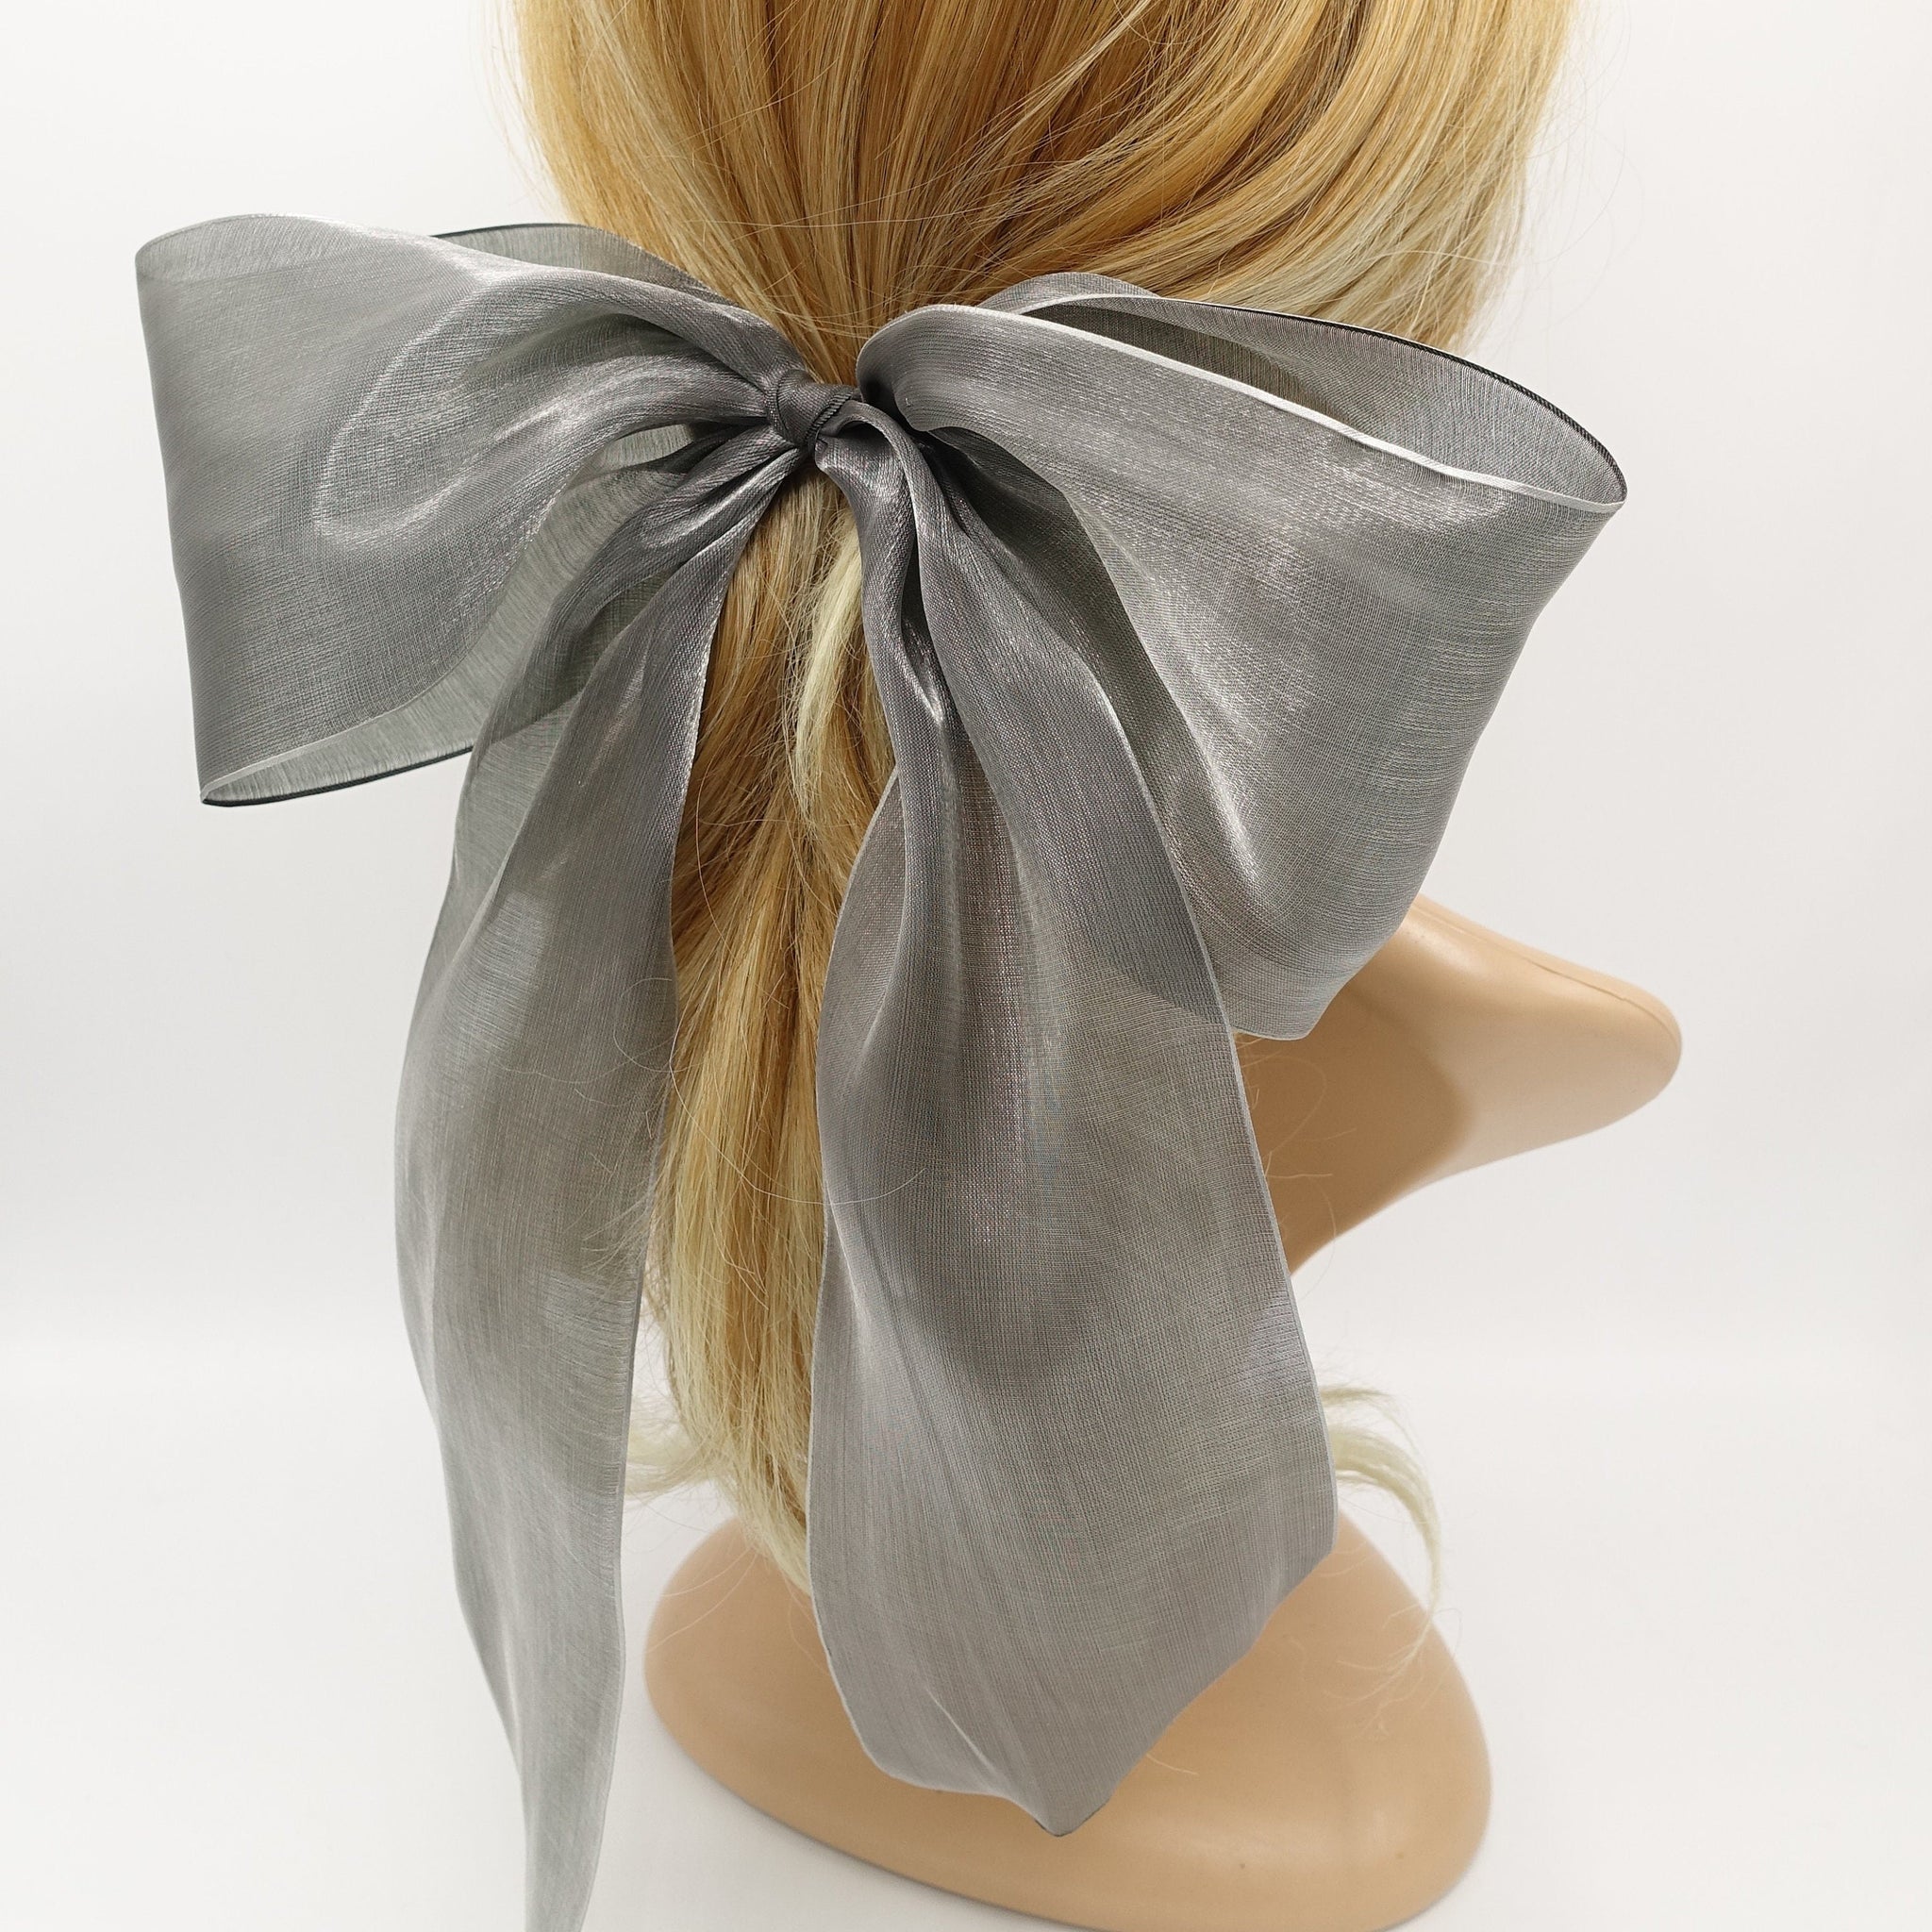 veryshine.com Barrette (Bow) Gray organza dot hair bow solid giant stylish hair accessory for women